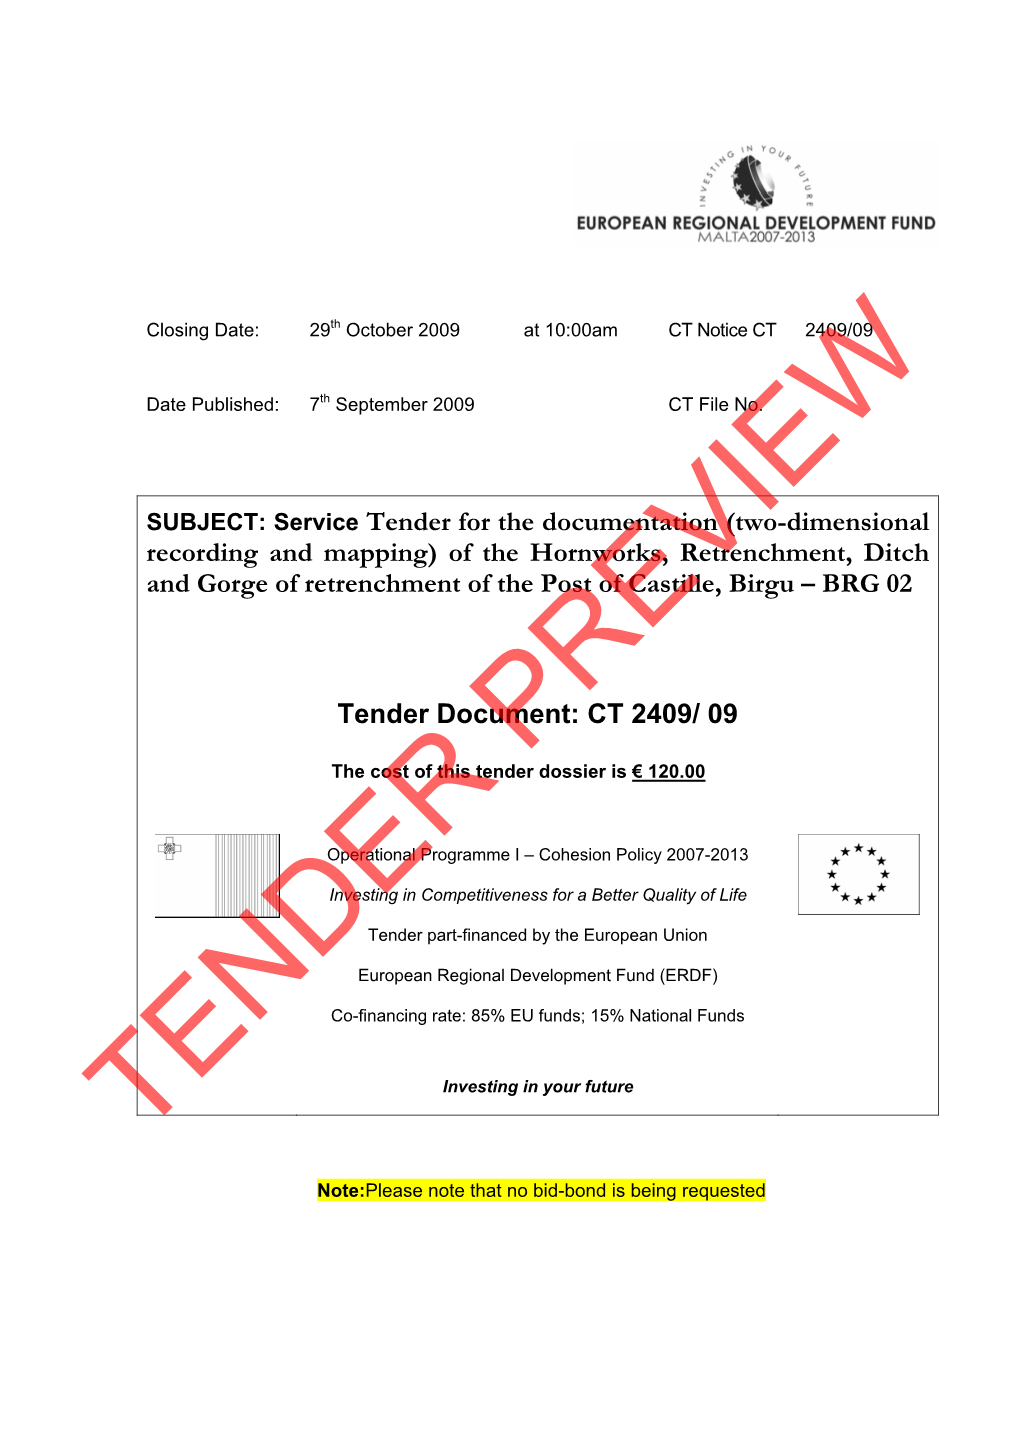 SUBJECT: Service Tender for the Documentation (Two-Dimensional